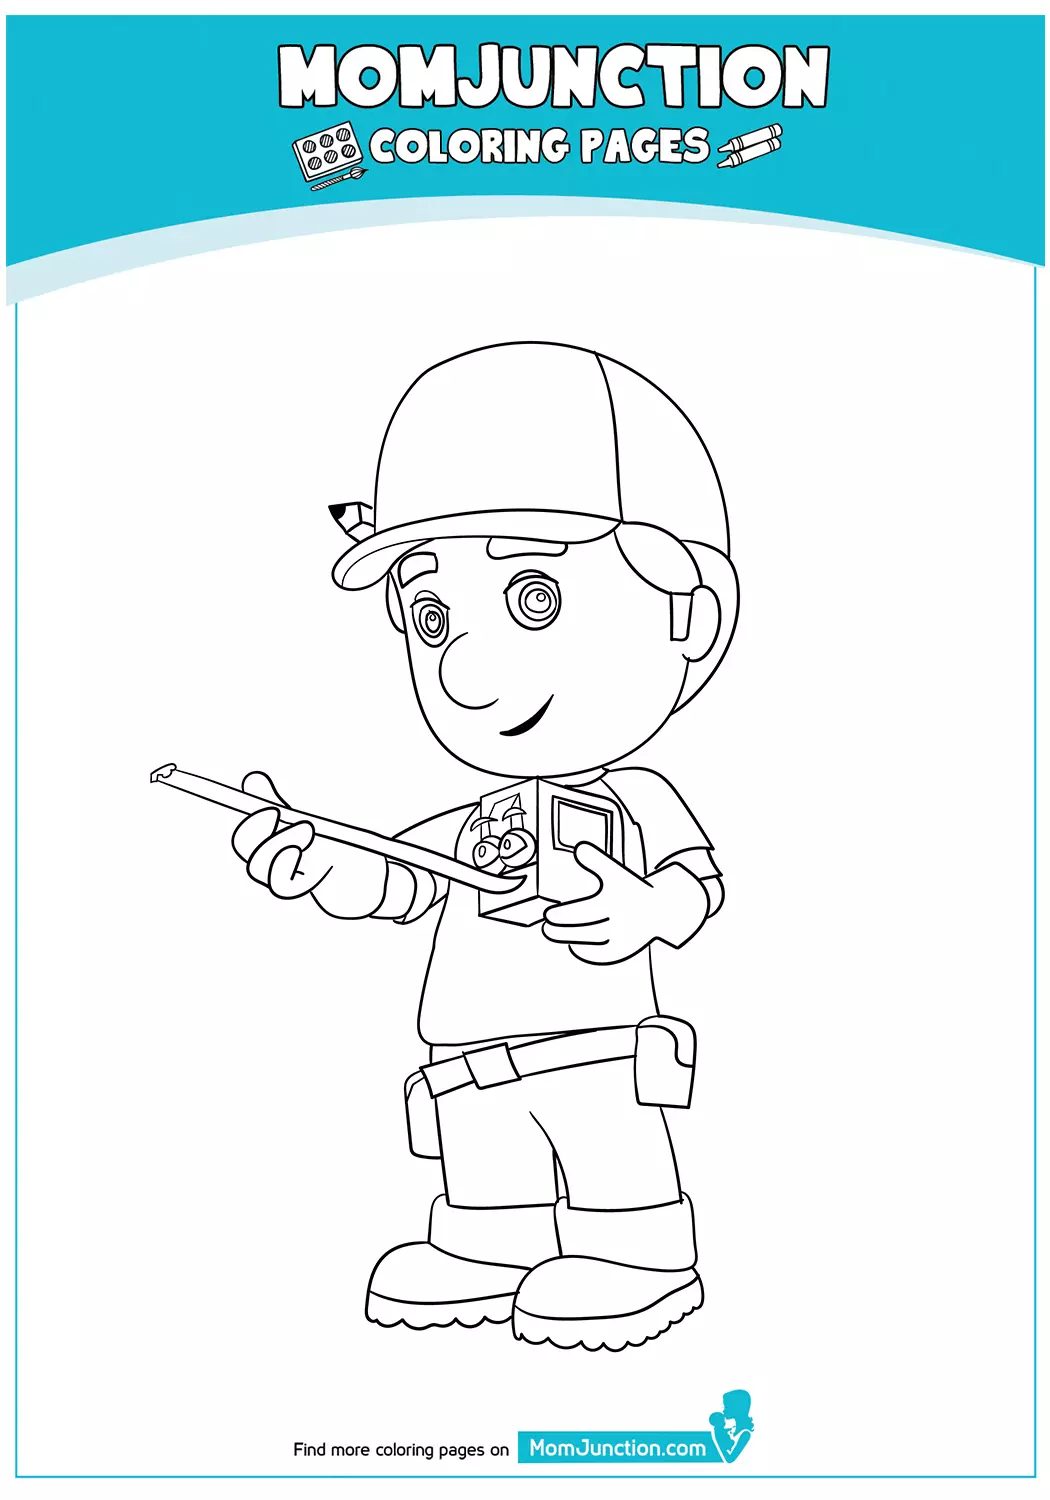 A-Handy-Manny-Coloring-Pages-Tape-17